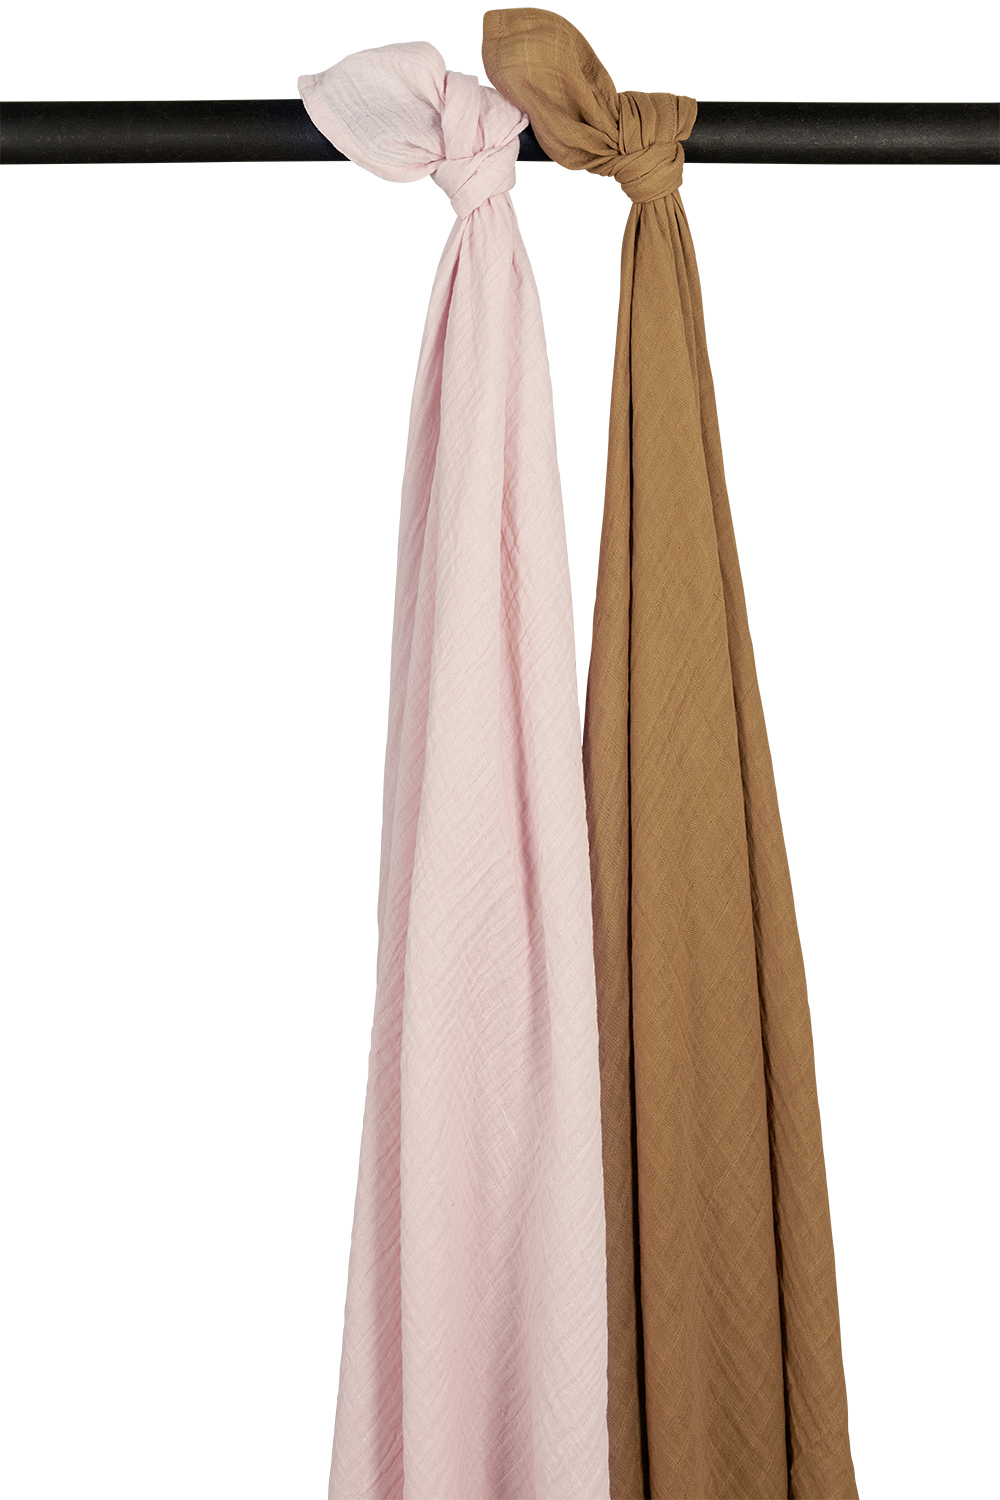 Swaddle 2-pack pre-washed muslin Uni - soft pink/toffee - 120x120cm